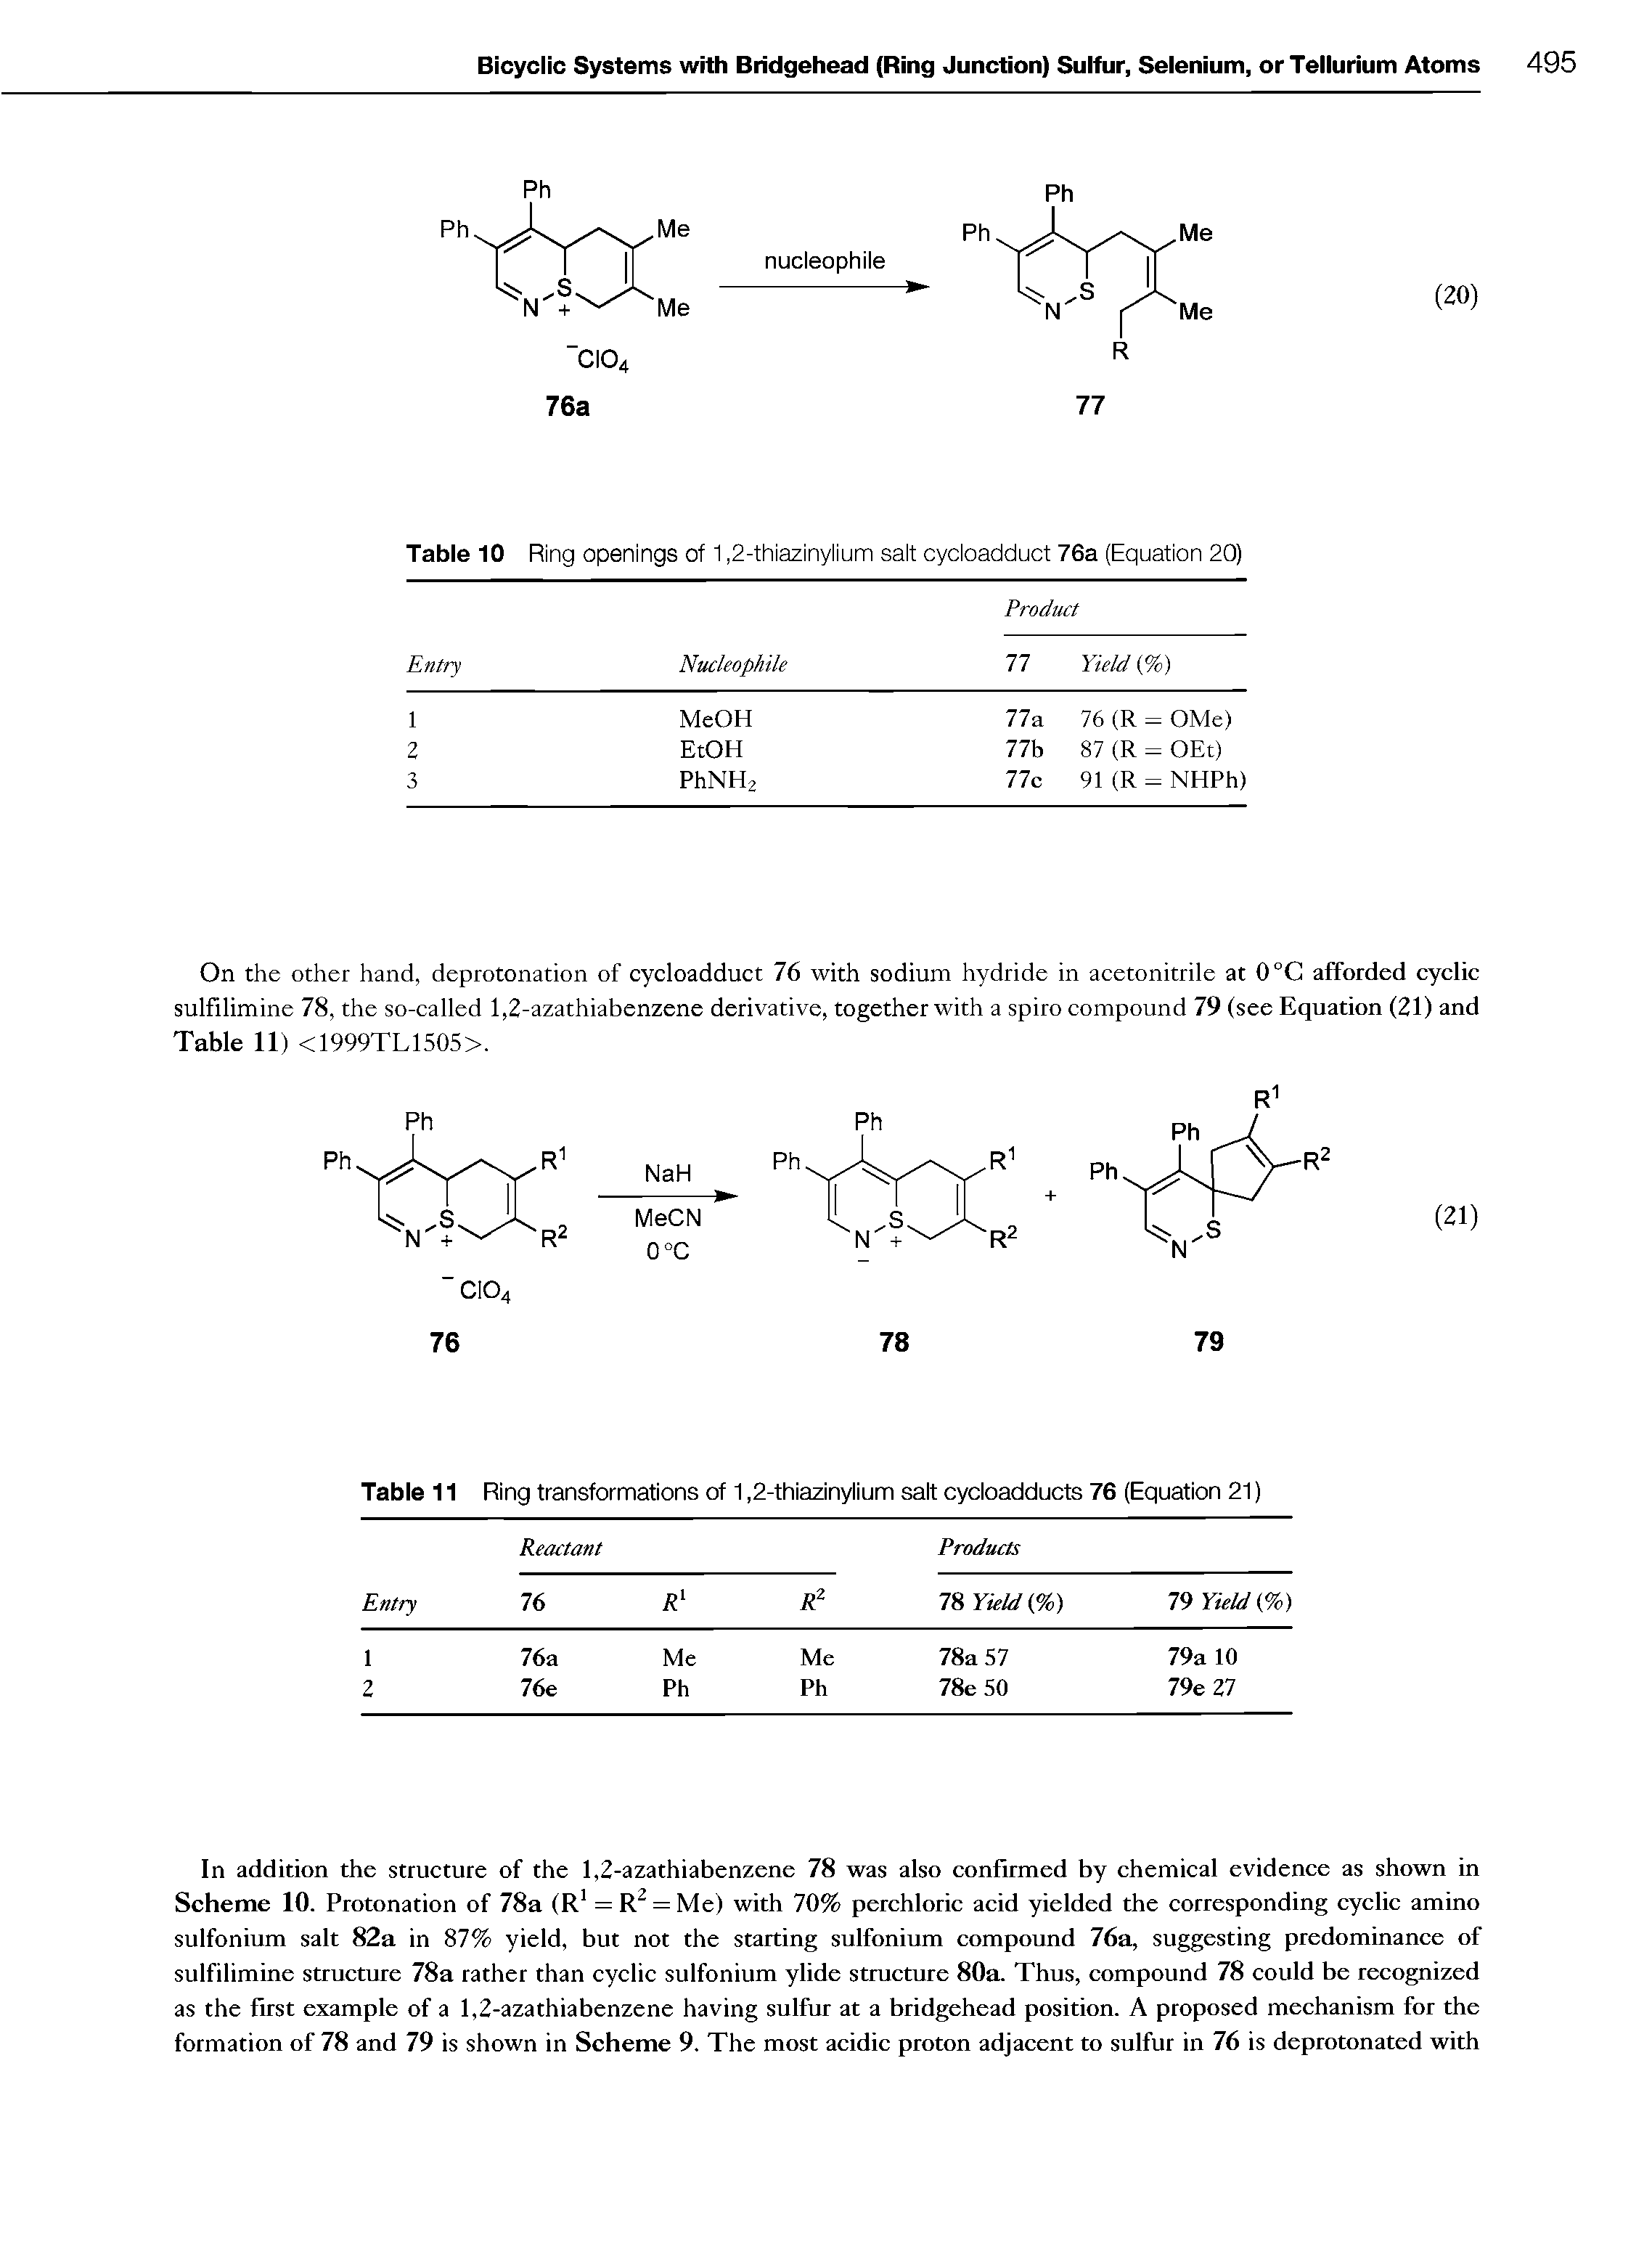 Table 11 Ring transformations of 1,2-thiazinylium salt cycloadducts 76 (Equation 21)...